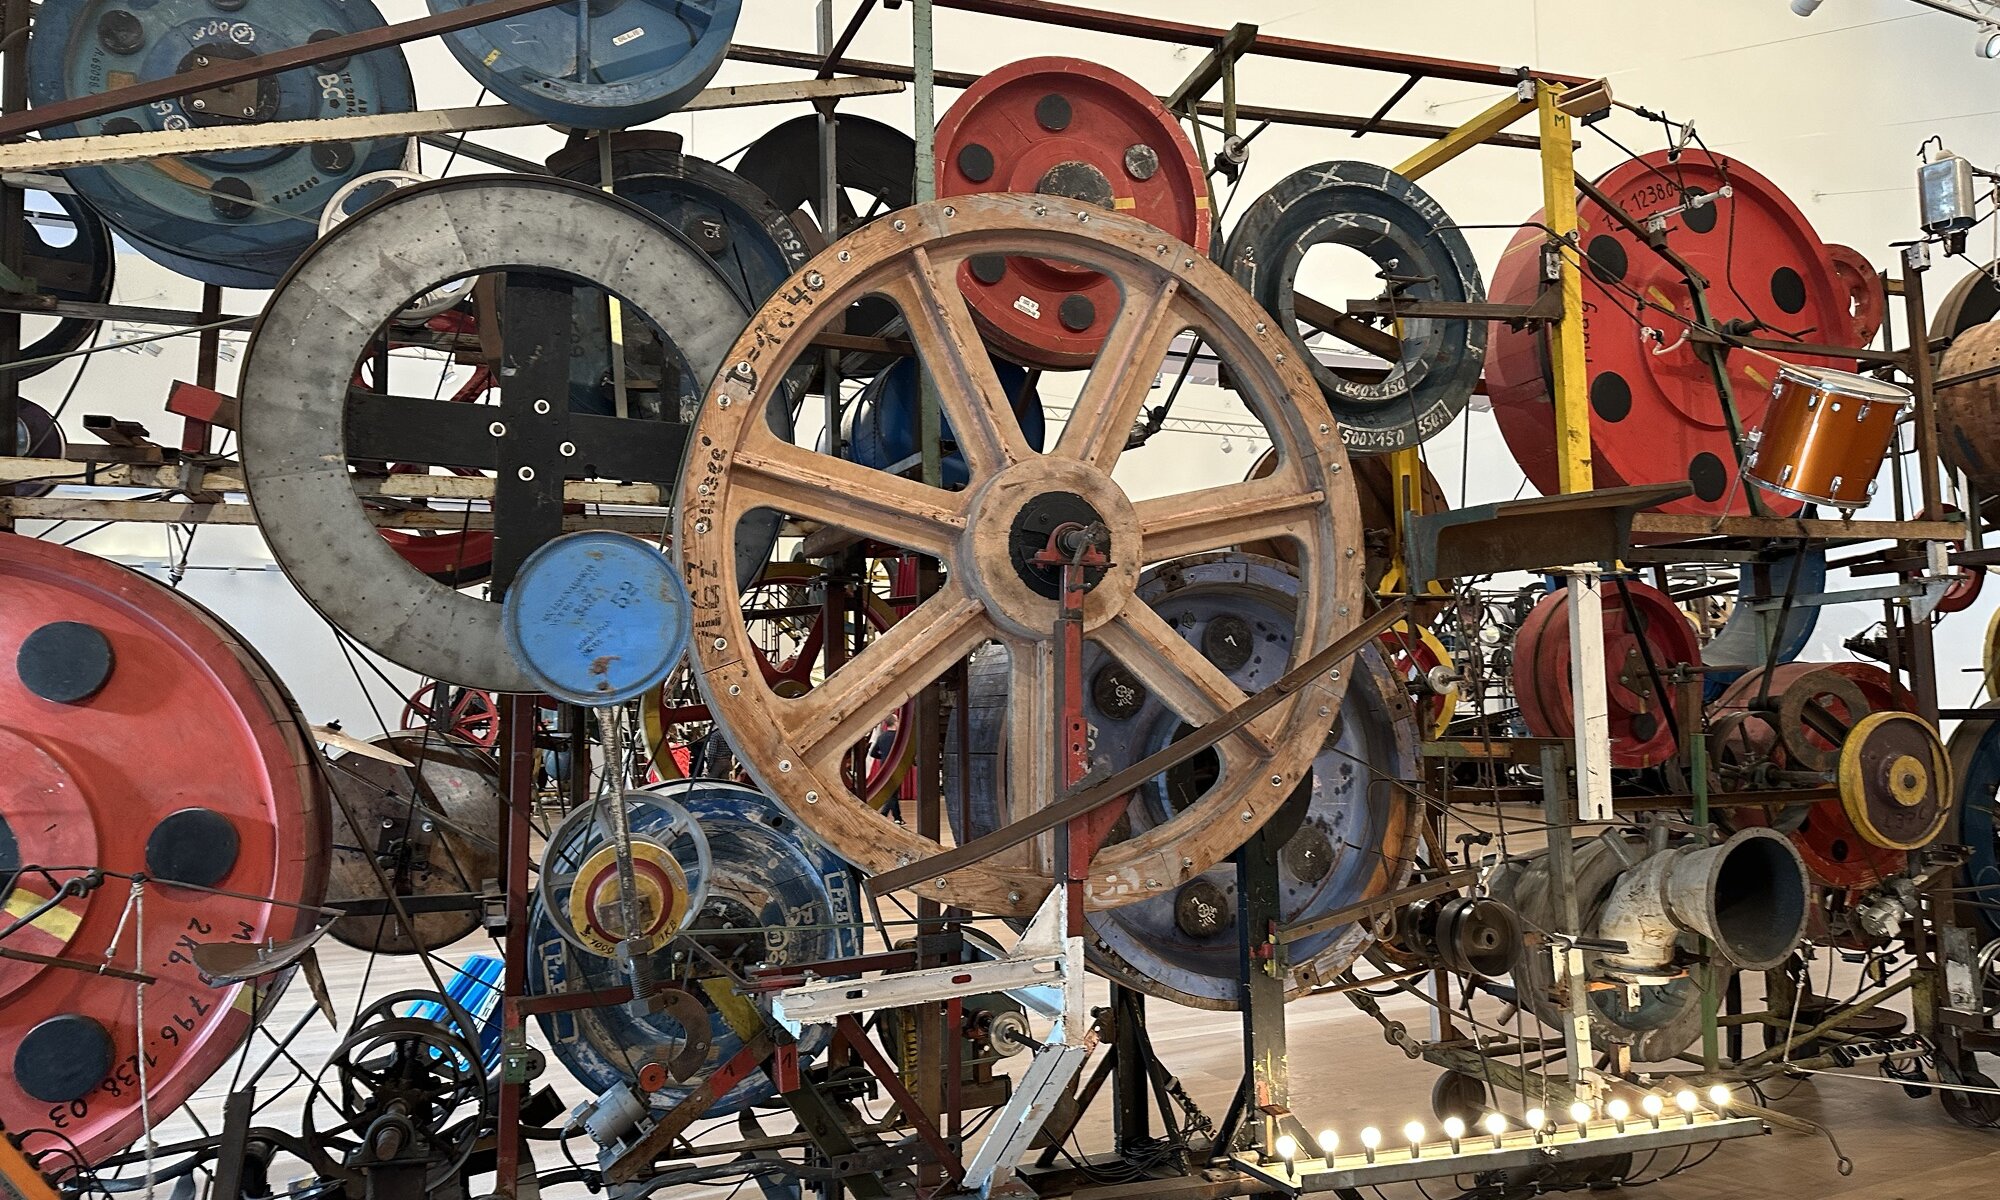 Museum Tinguely, Basel